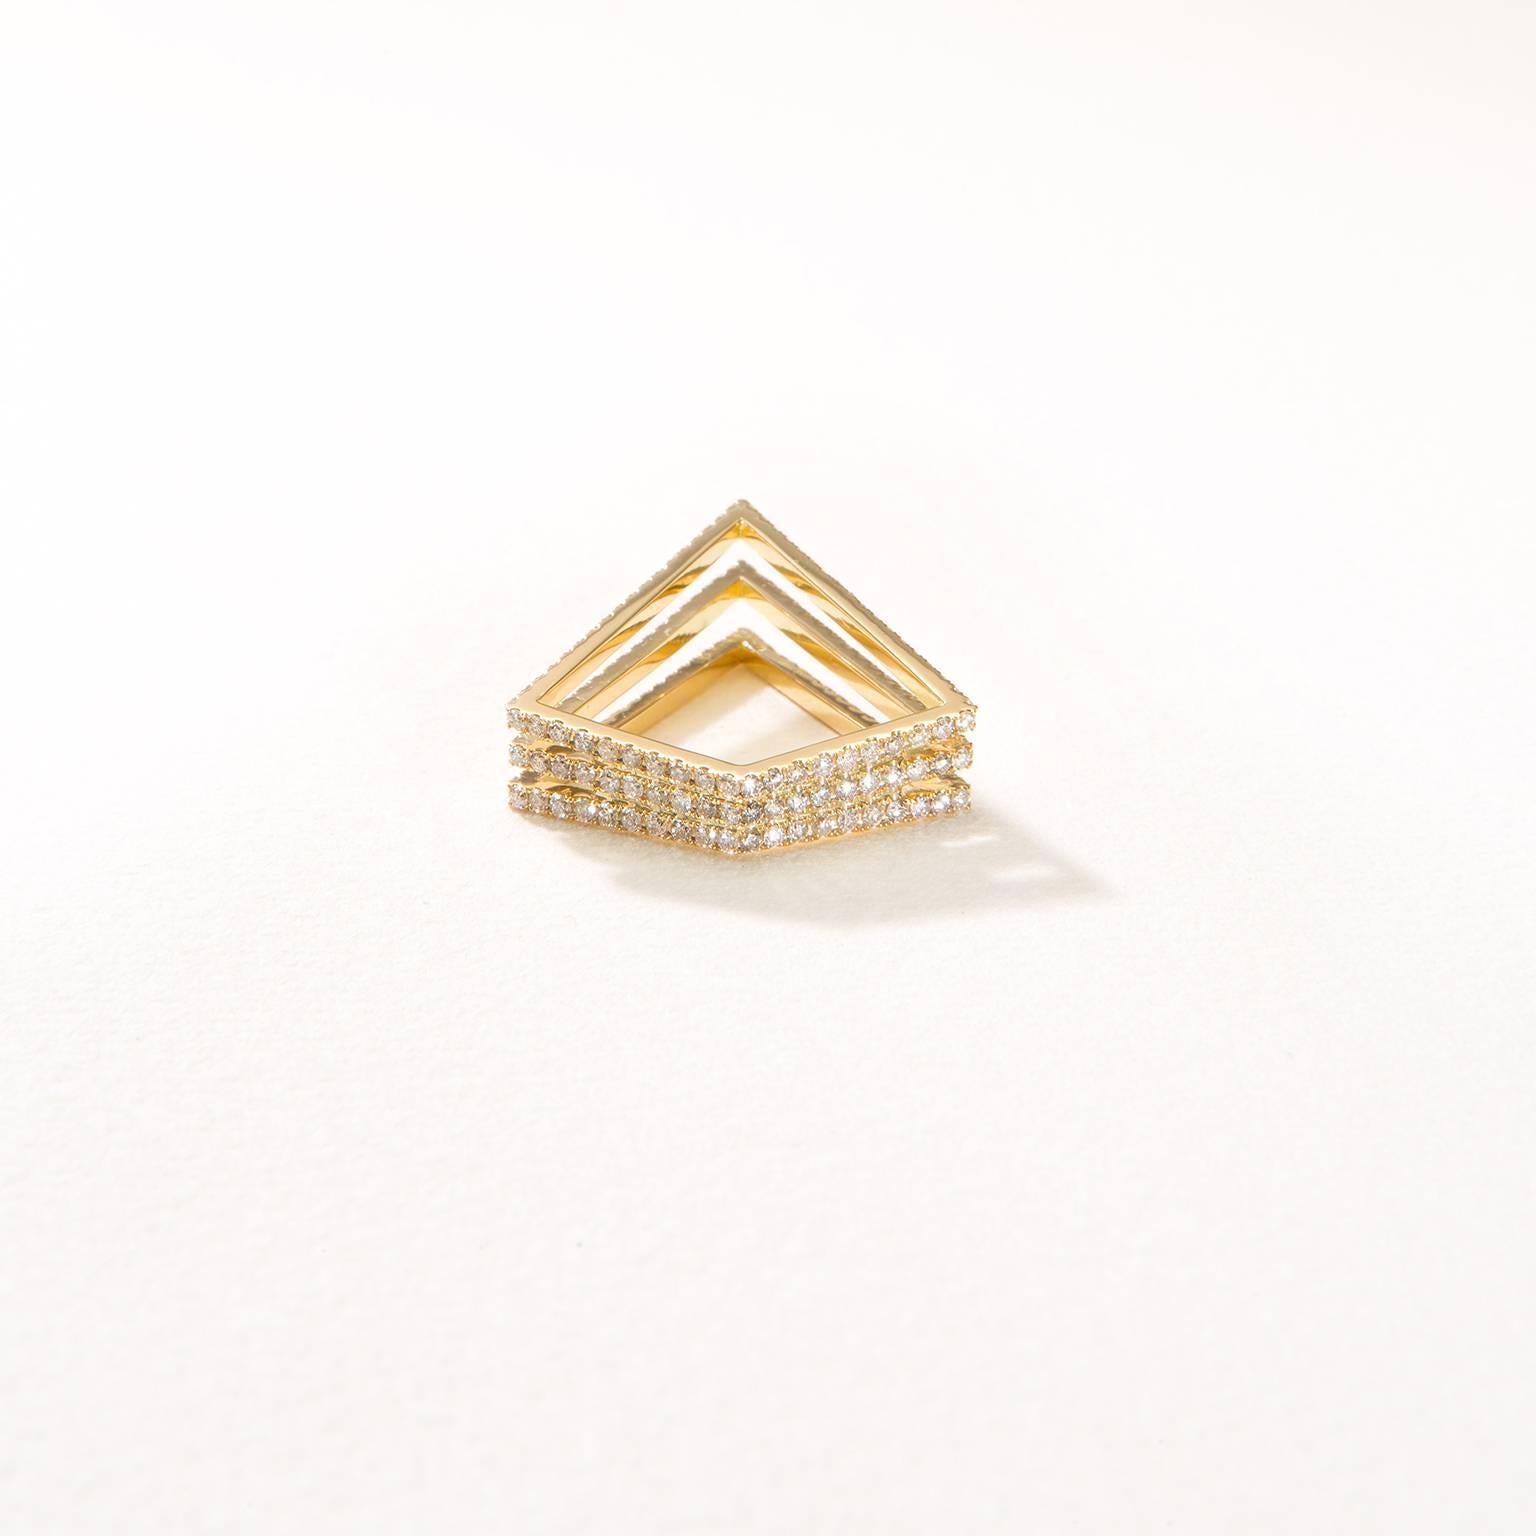 Sophie Birgitt Full Diamond Triangular Cocktail Ring Pavé hand set with 58-facet diamonds extending around the circumference of the ring. Diamond Carat Weight: 1,66 ct.

*MADE TO ORDER: 3 WEEKS LEAD TIME*
*WORLDWIDE COMPLIMENTARY SHIPPING*

The